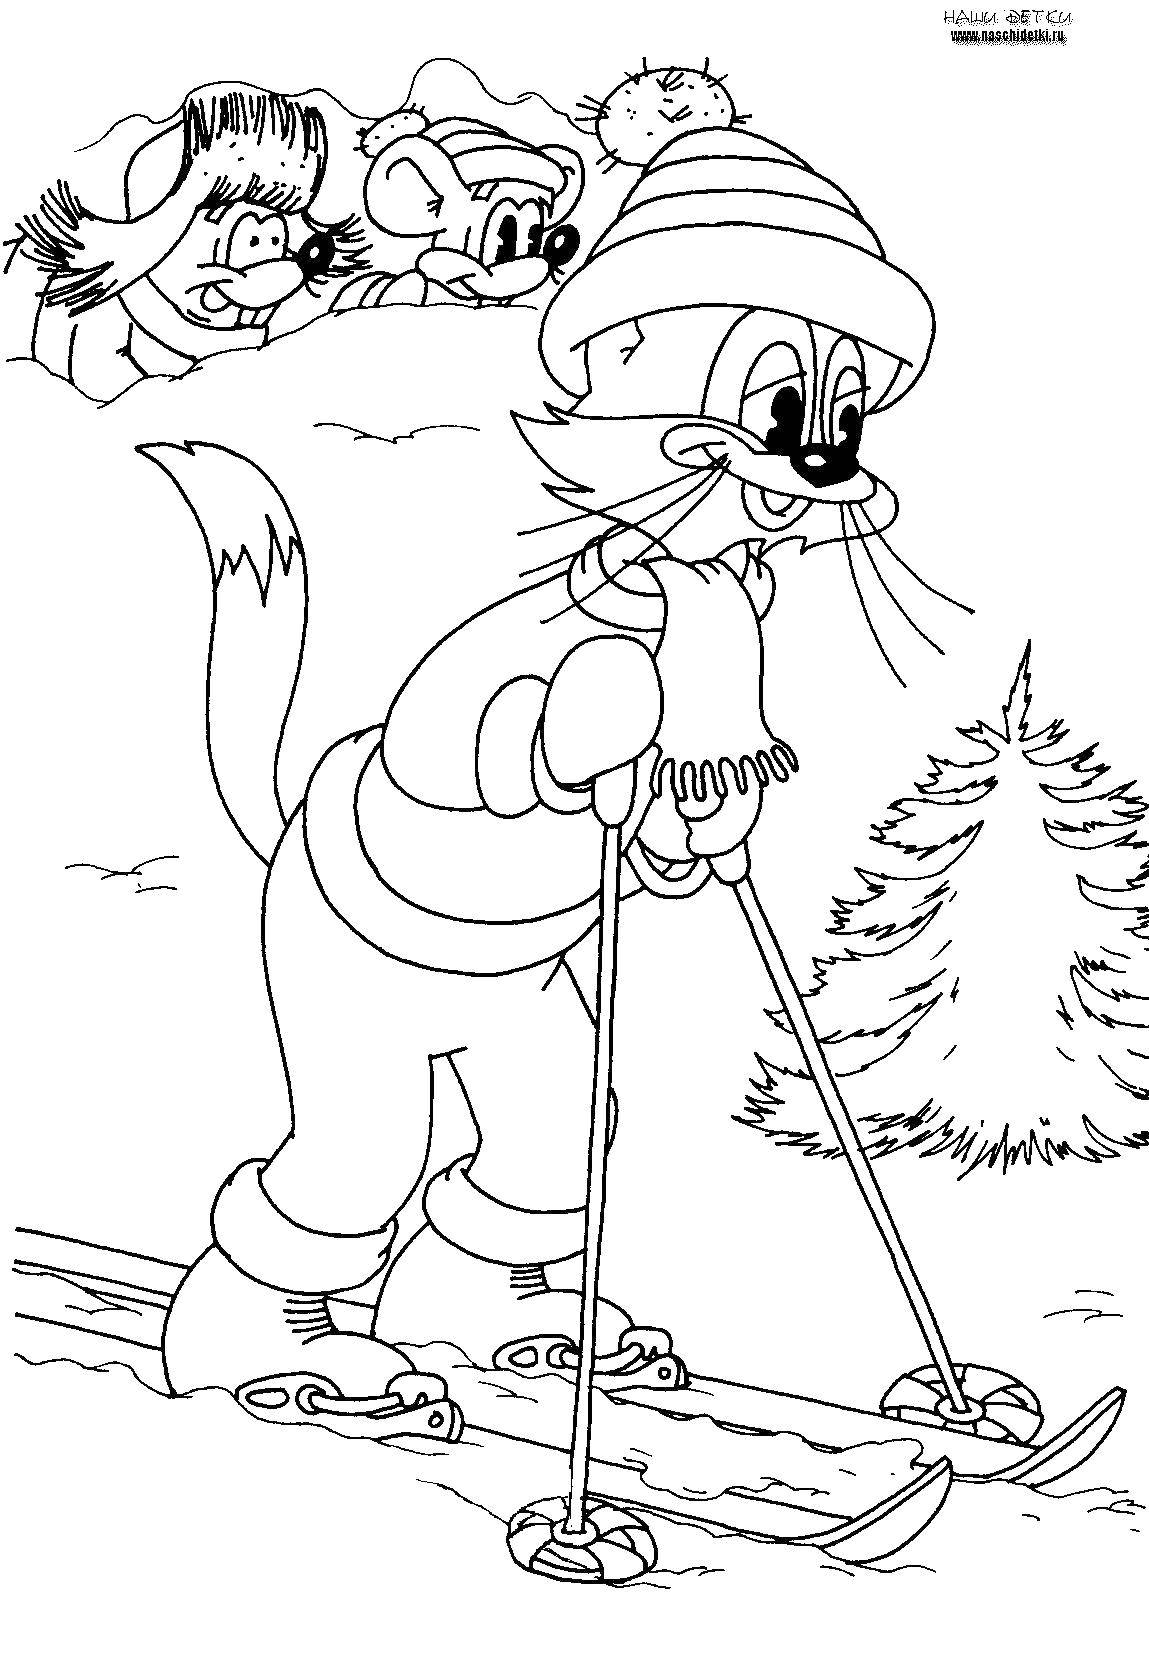 Coloring Leopold skiing. Category Cartoon character. Tags:  cat, skiing.